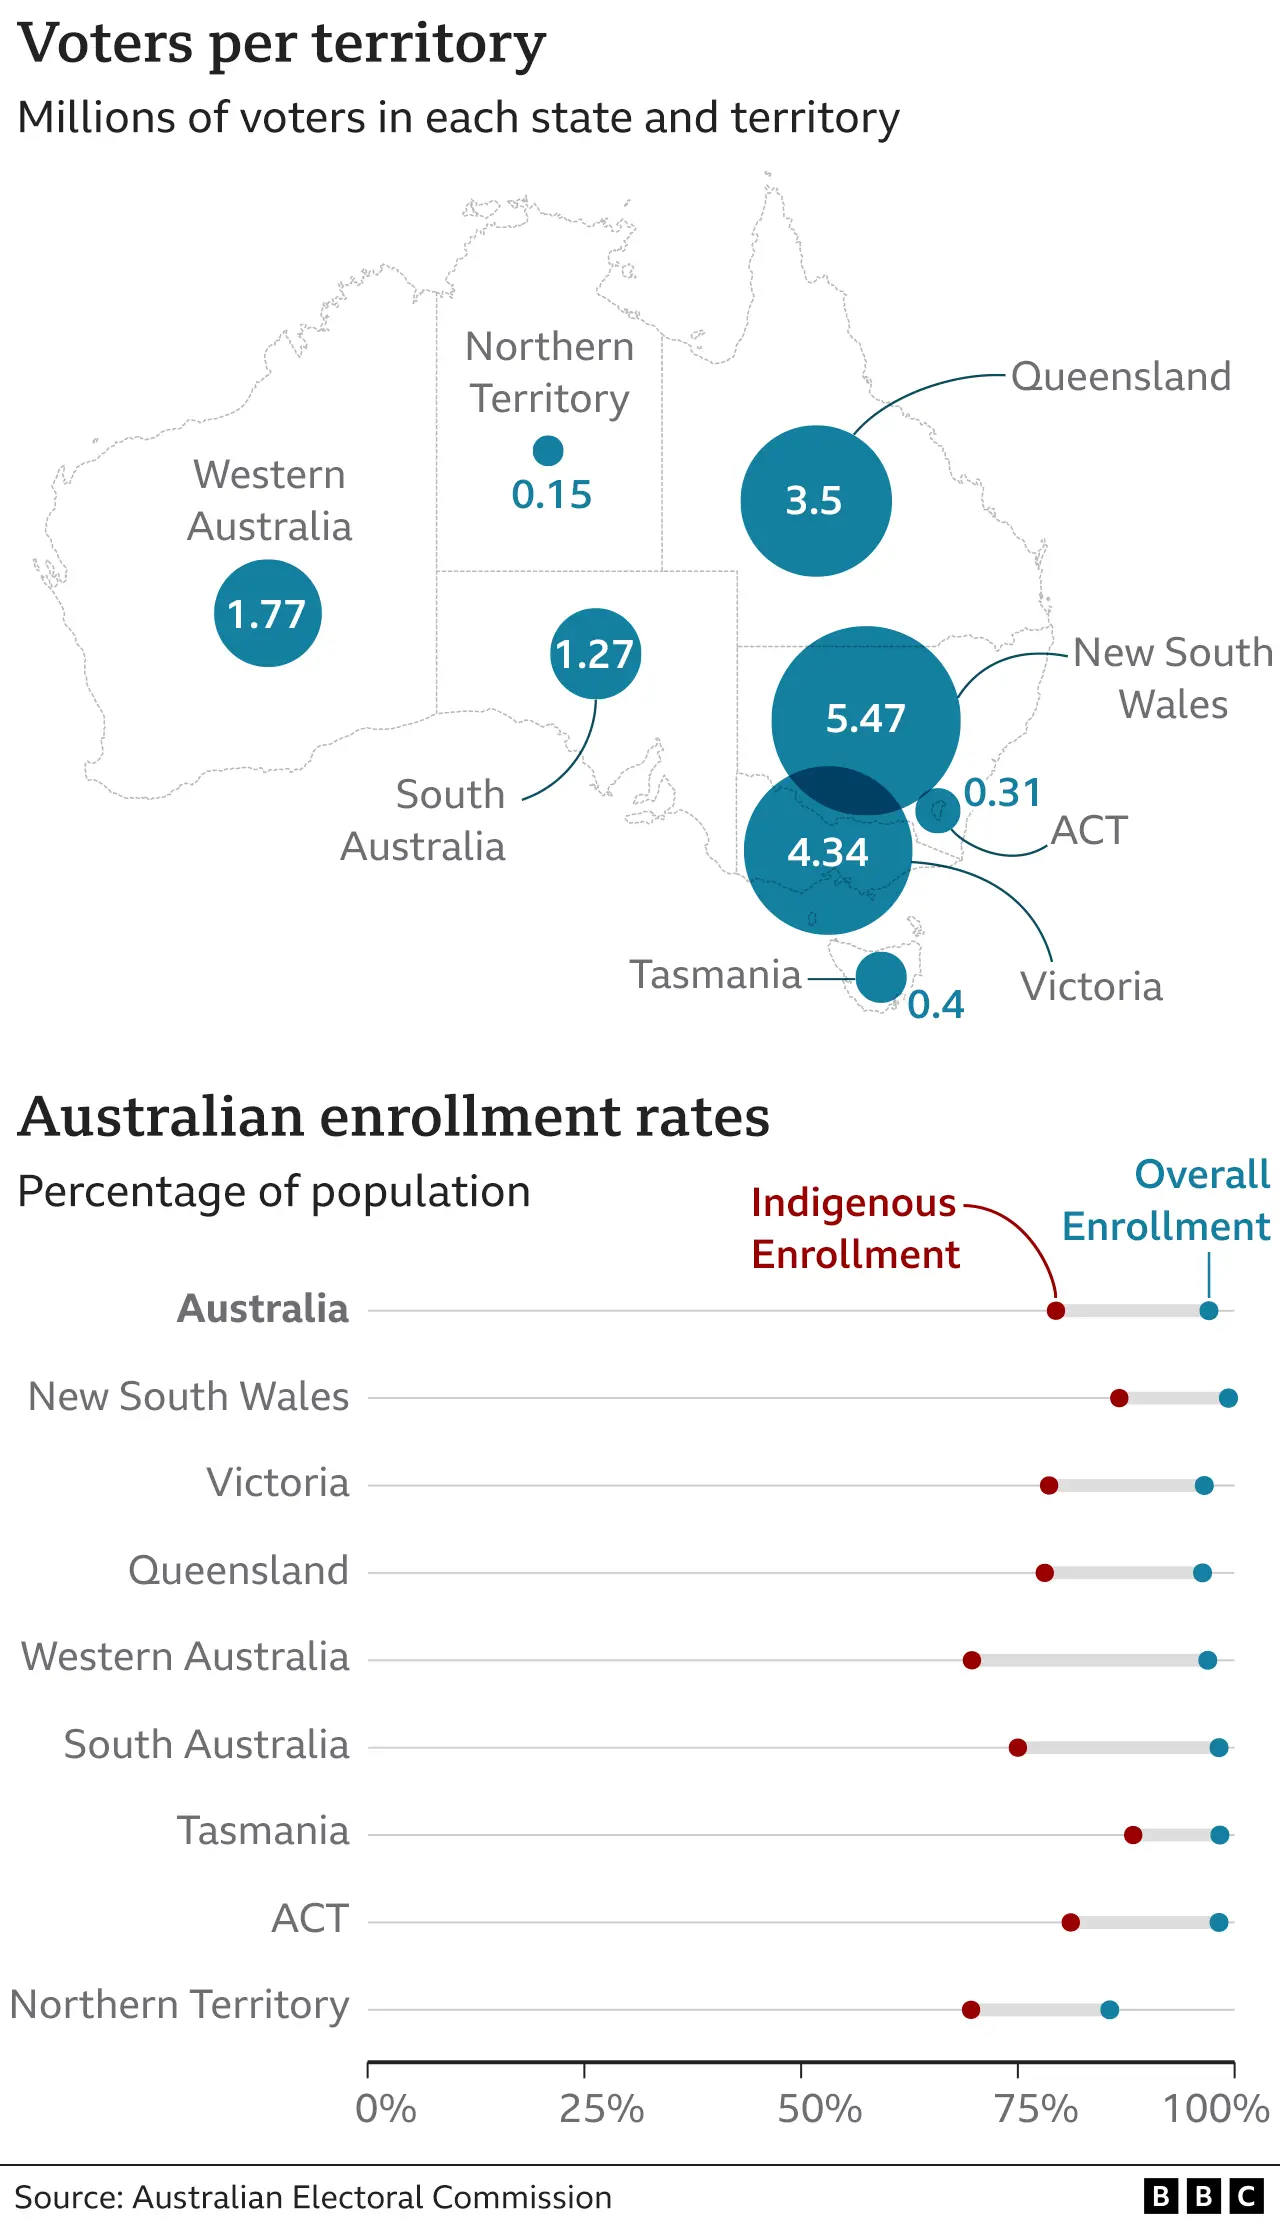 A map showing the proportion of voters in states around Australia - the most are in New South Wales and Victoria - and high enrollment rates nationwide, but with slightly lower rates for Indigenous people